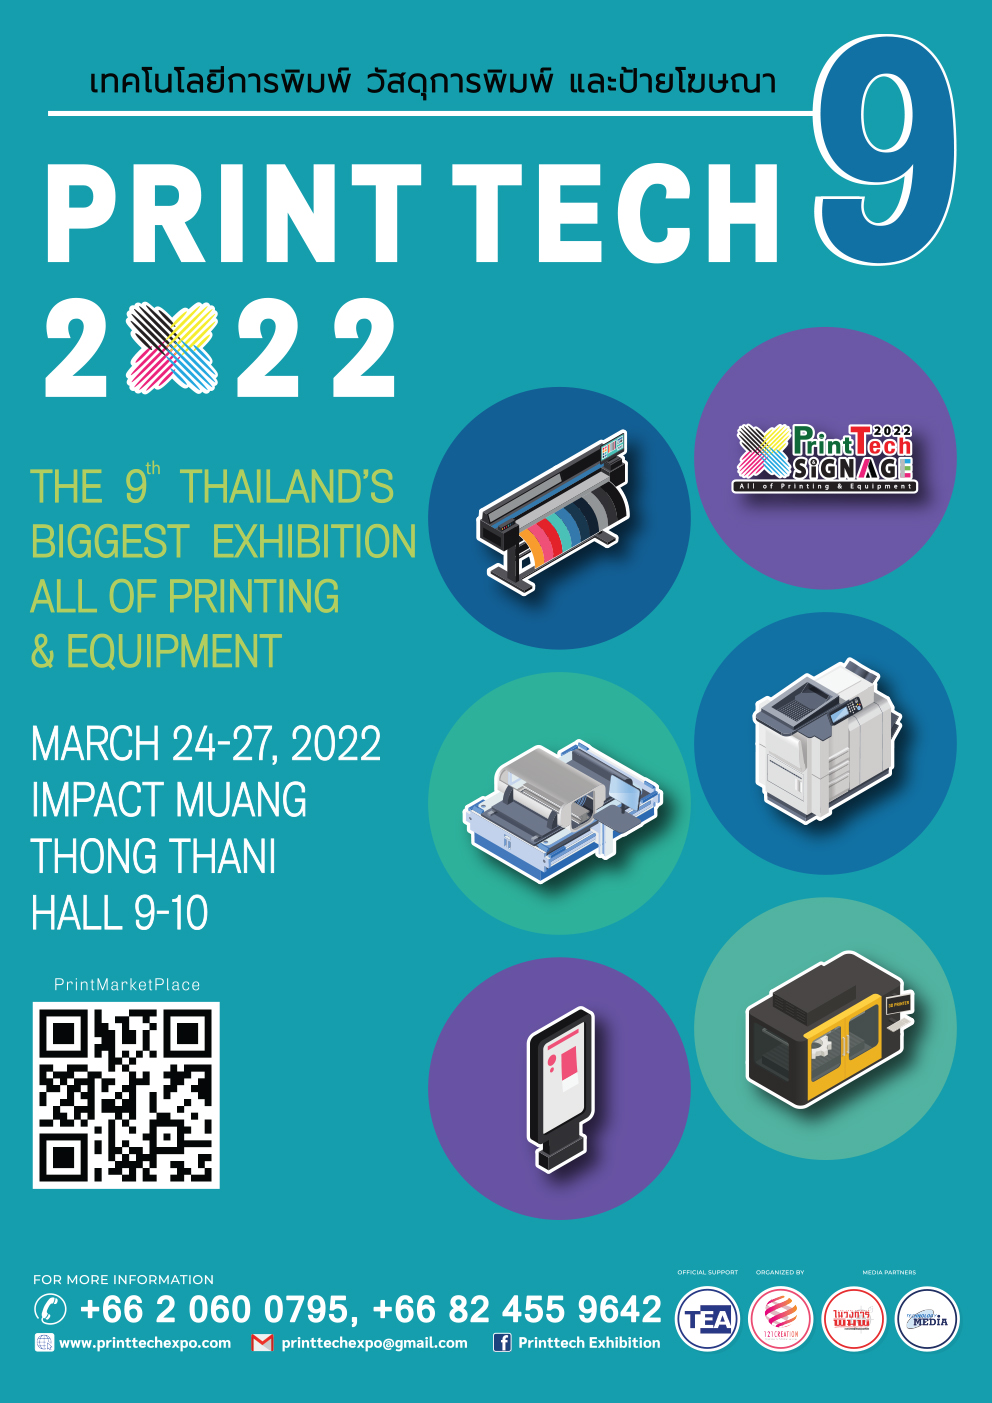 The 9 th Printtech & Signage 2022